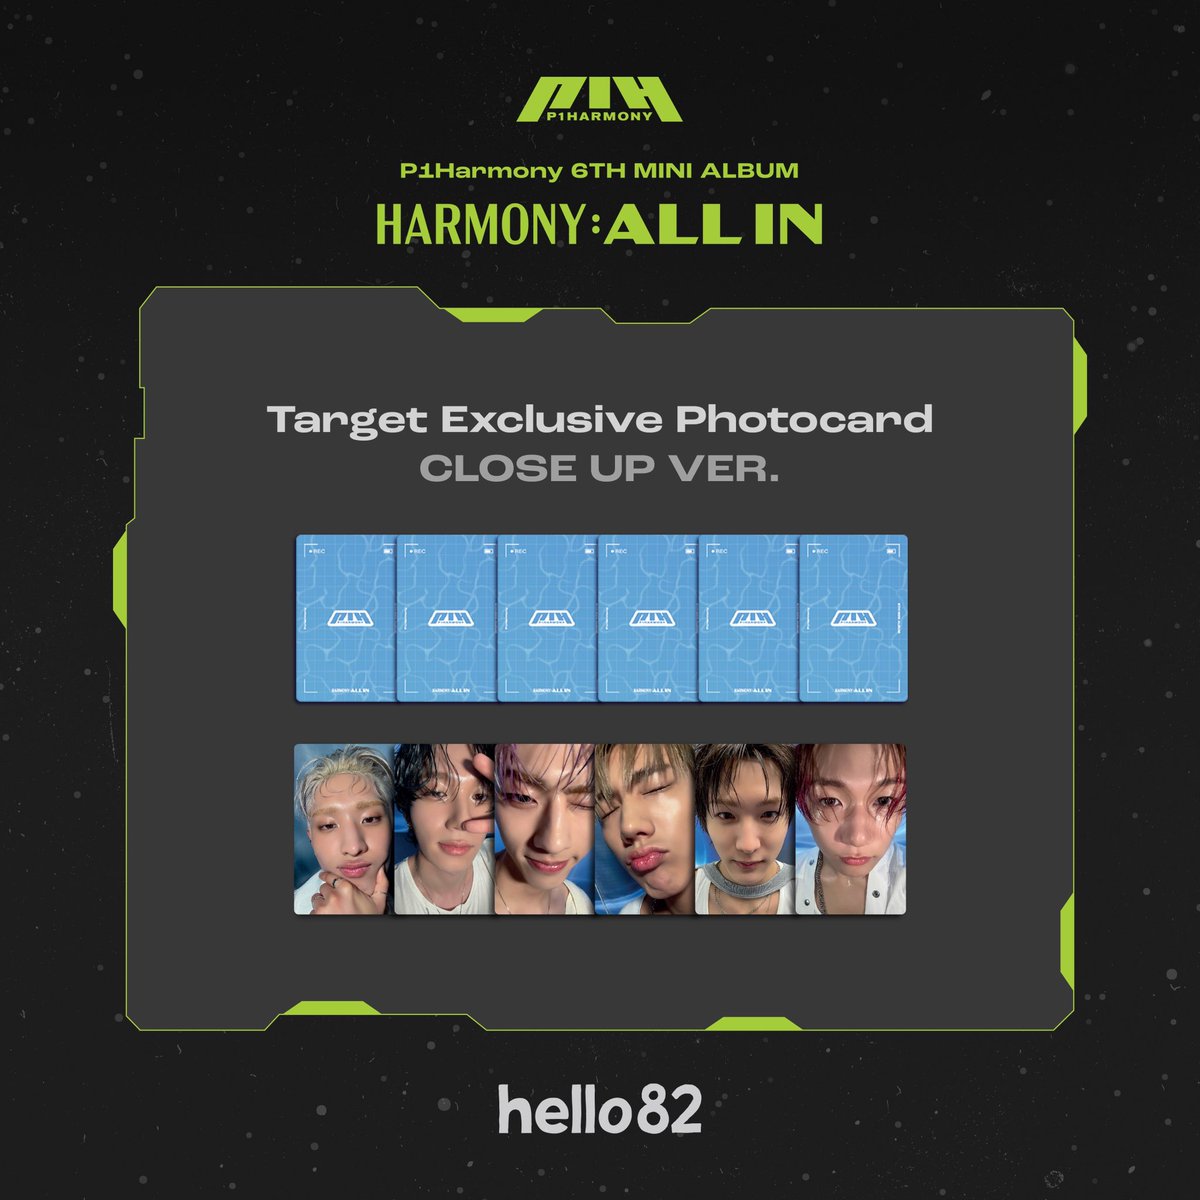 P1Harmony - HARMONY : ALL IN 
 
TARGET EXCLUSIVE 
CLOSE UP VER. 

Order now on Target.com 
→ p1harmony.ffm.to/allin

#P1Harmony #피원하모니 #P1H #JUMP #ALLIN